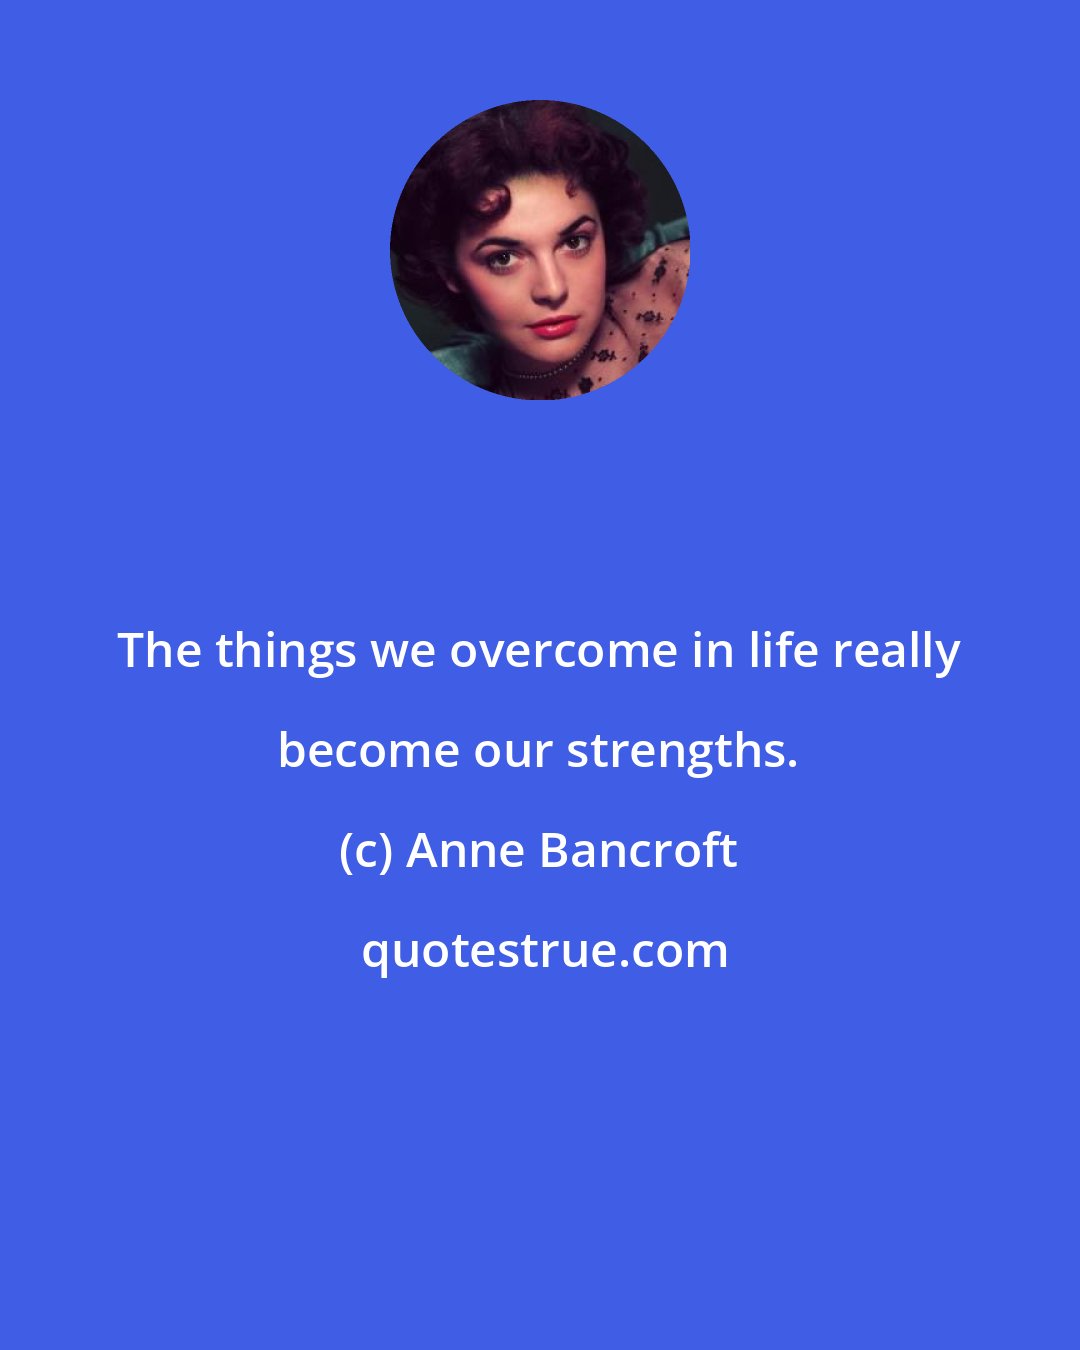 Anne Bancroft: The things we overcome in life really become our strengths.